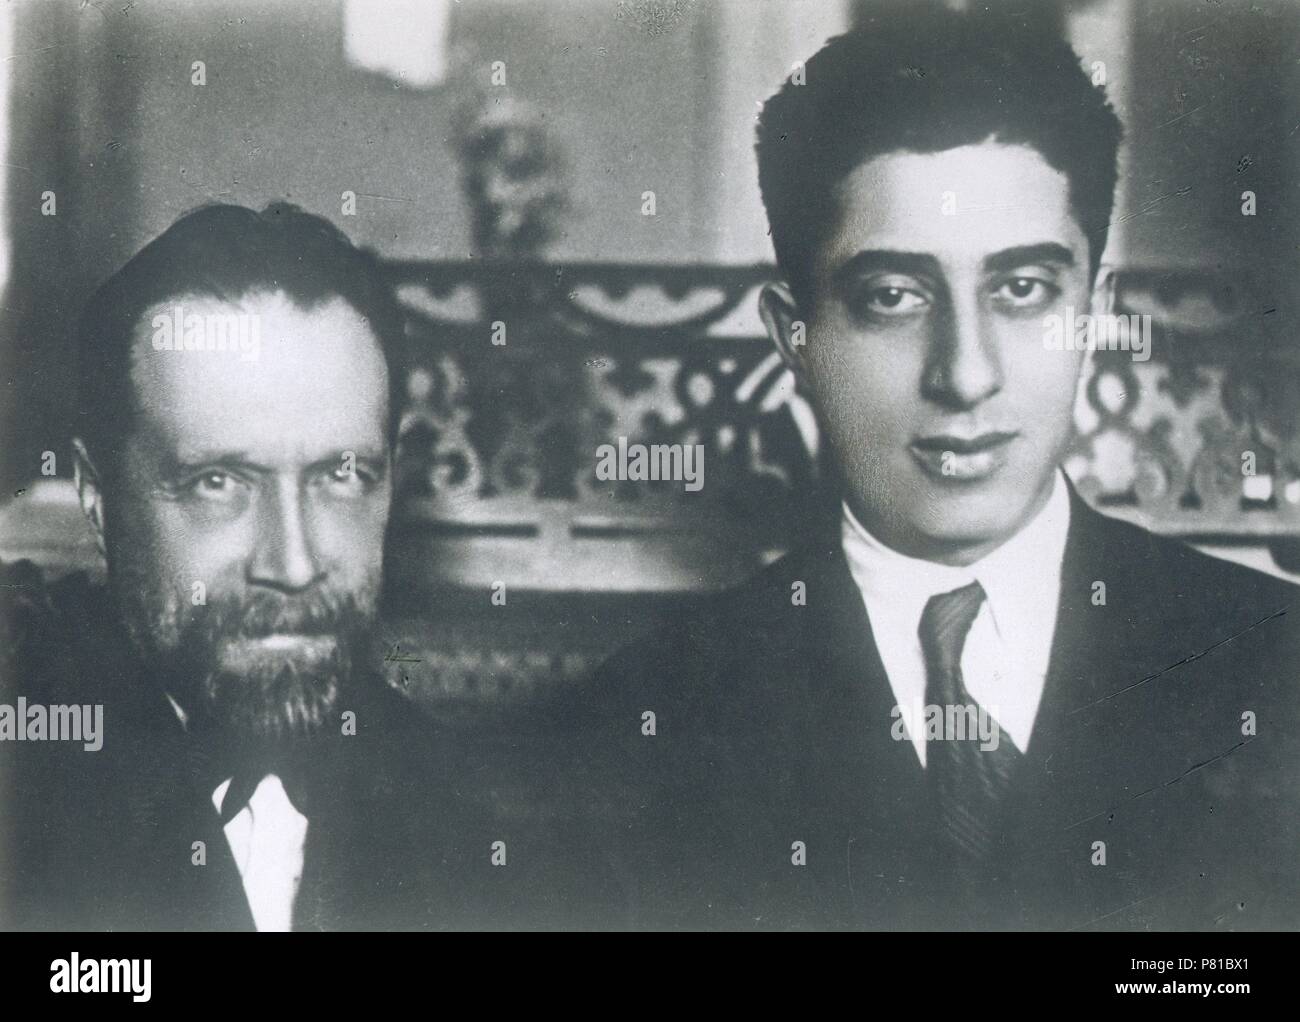 The Composers Nikolai Myaskovsky (1881-1950) and Aram Khachaturian (1903-1978). Museum: Russian State Archive of Literature and Art, Moscow. Stock Photo